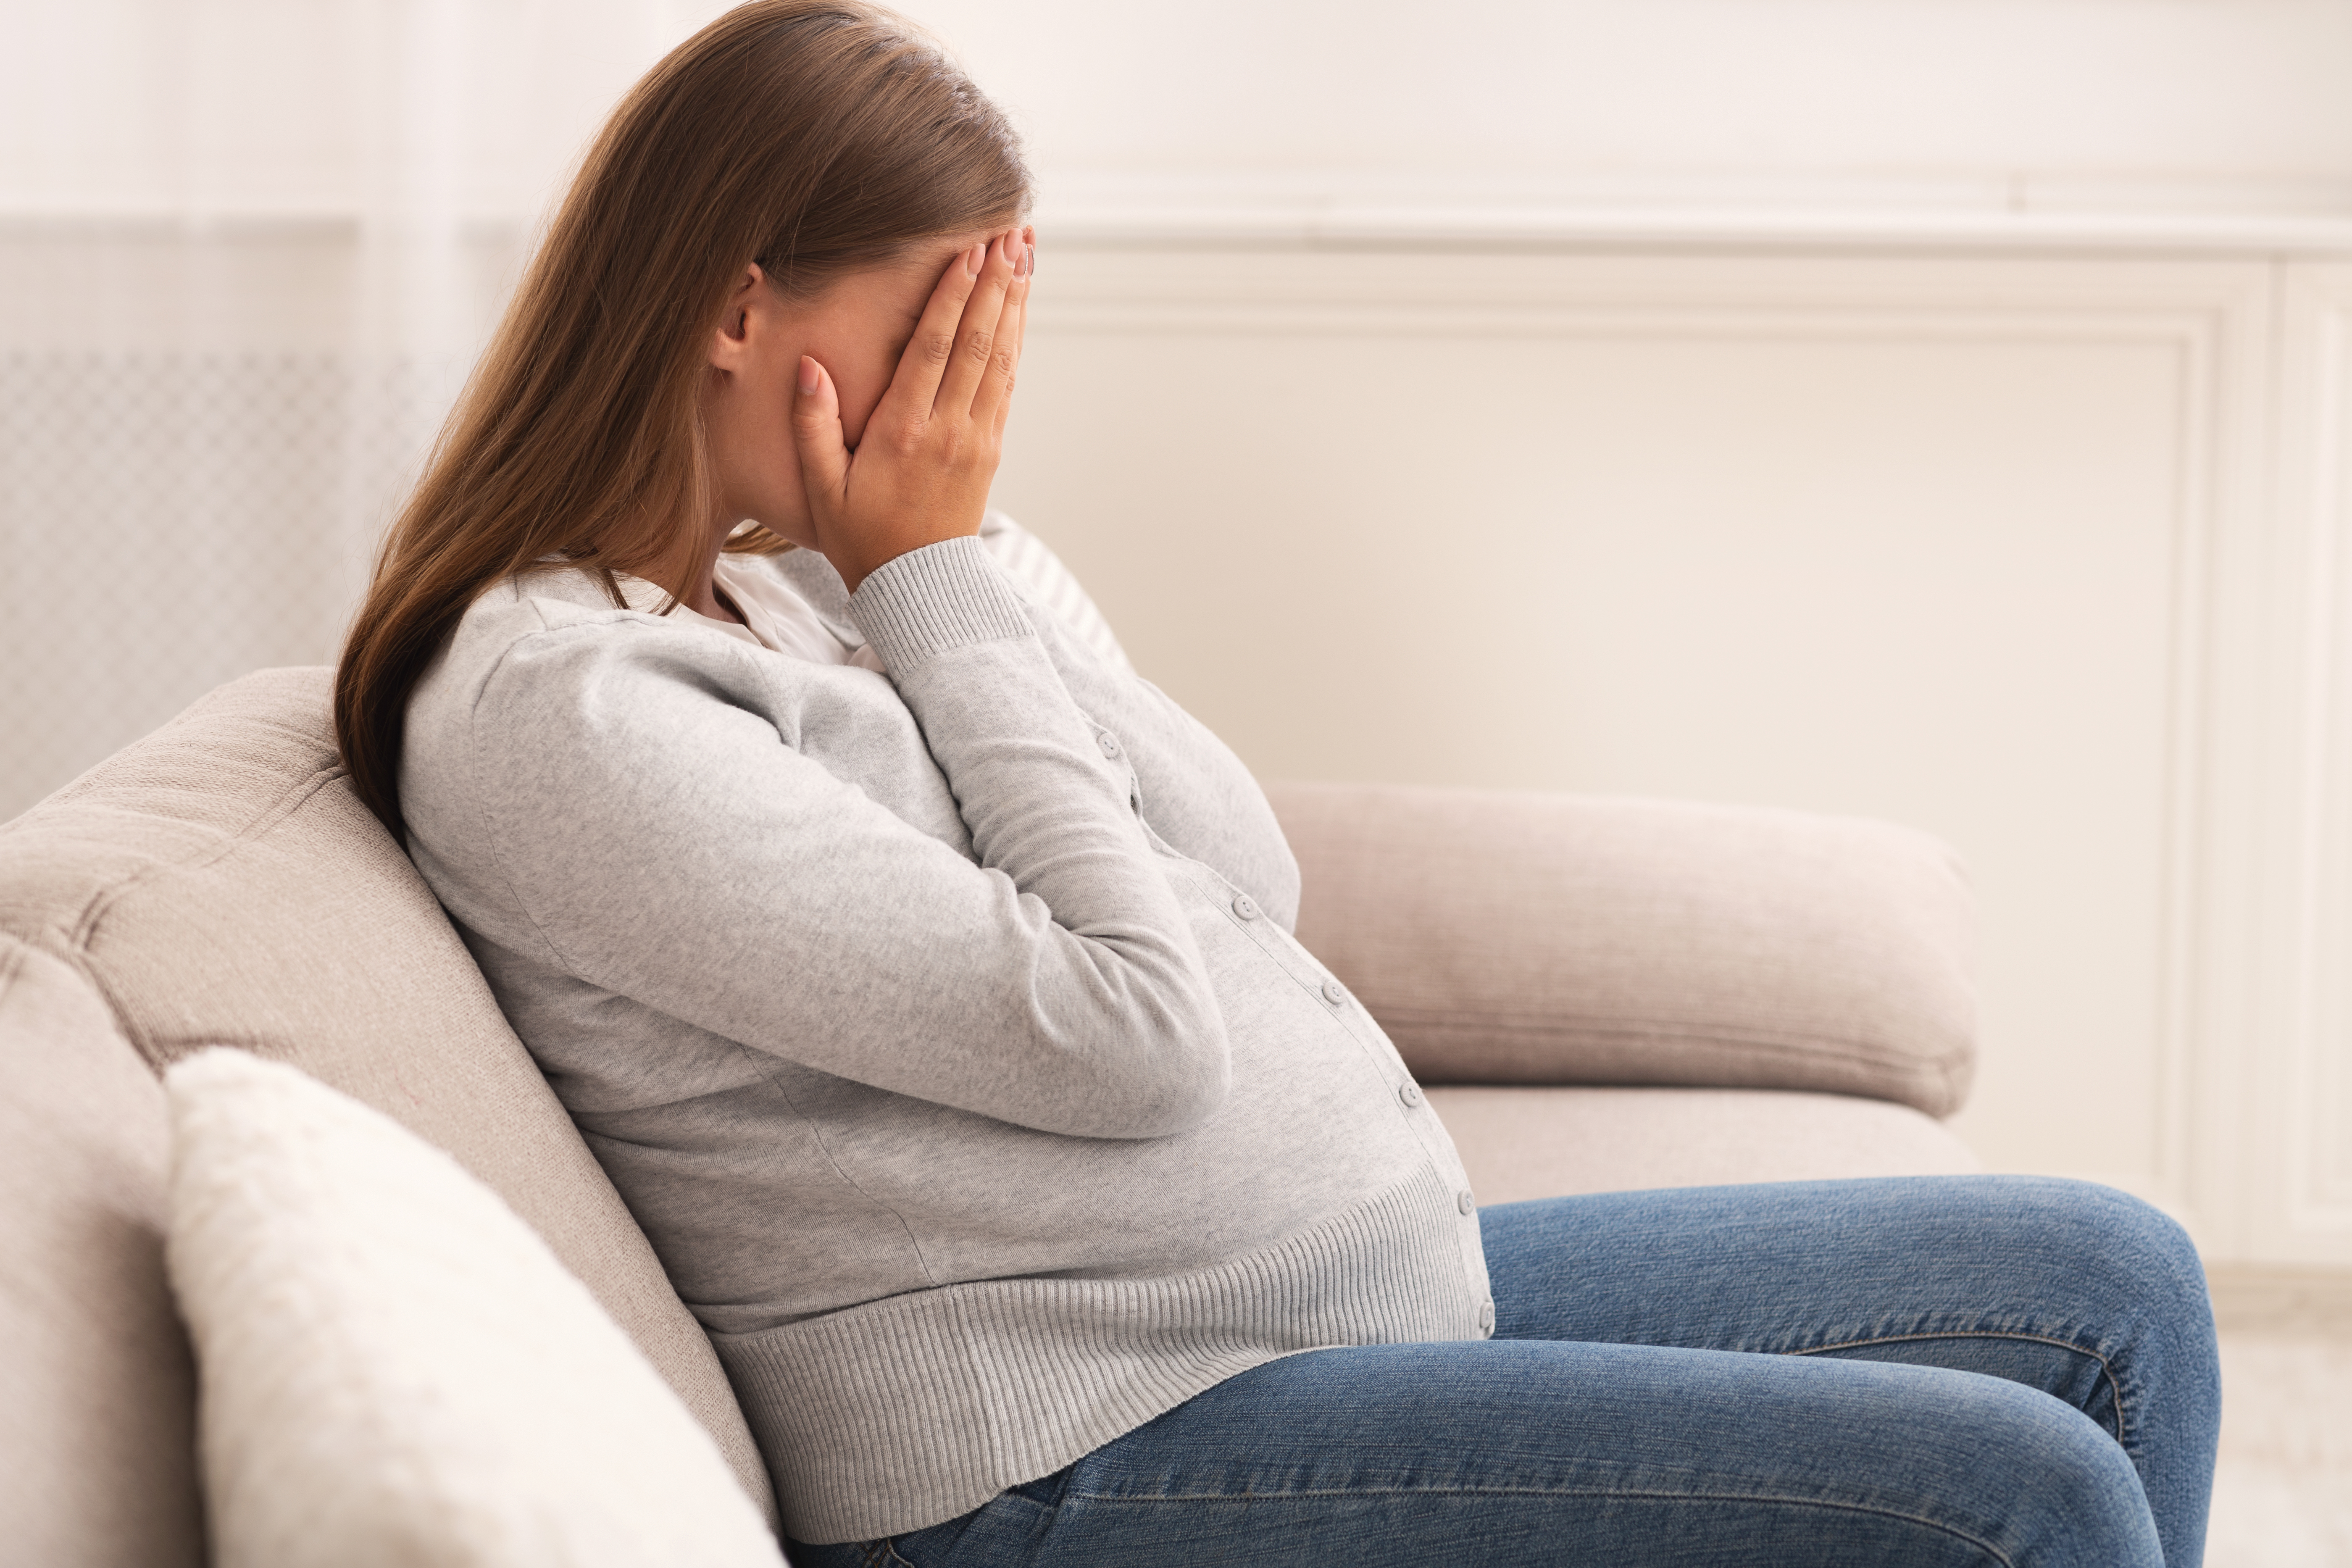 A pregnant woman looking sad | Source: Shutterstock